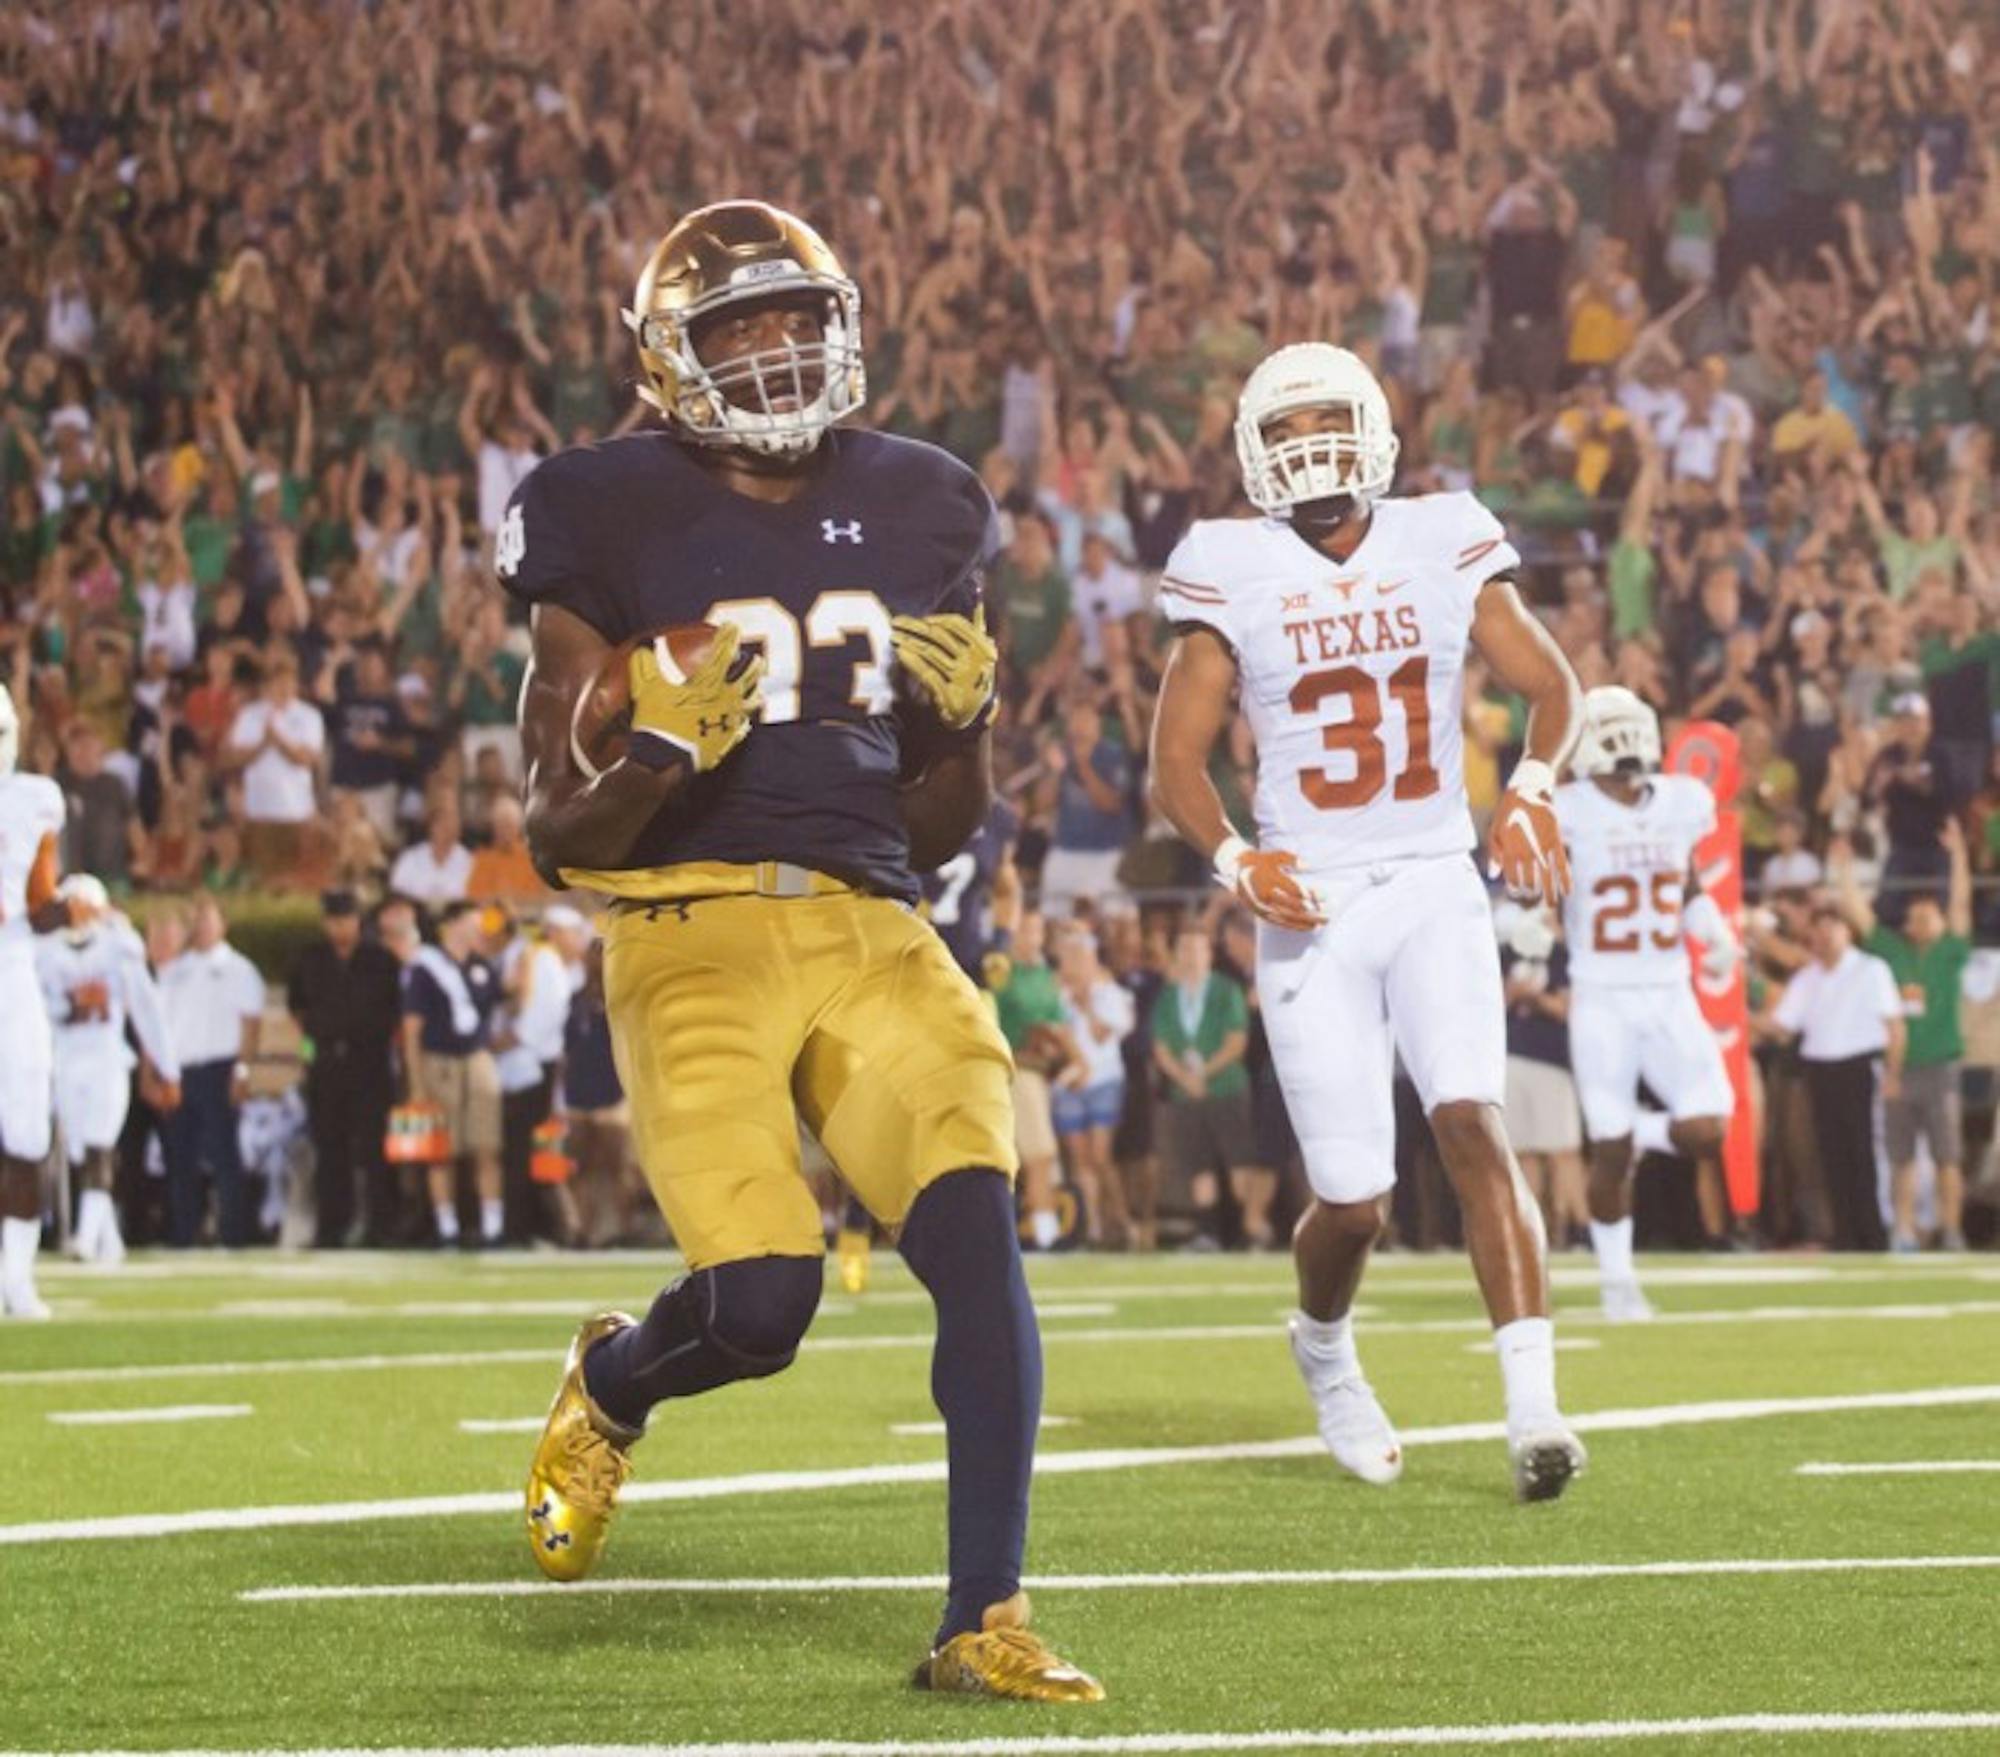 Irish sophomore running back Josh Adams crosses the goal line for a touchdown during Notre Dame’s 38-3 win last season over Texas on Sept. 5. Adams rushed for two touchdowns in the game — his collegiate debut — as the Irish routed the Longhorns. Adams enters his sophomore year alongside senior Tarean Folston as a starter on the depth chart.